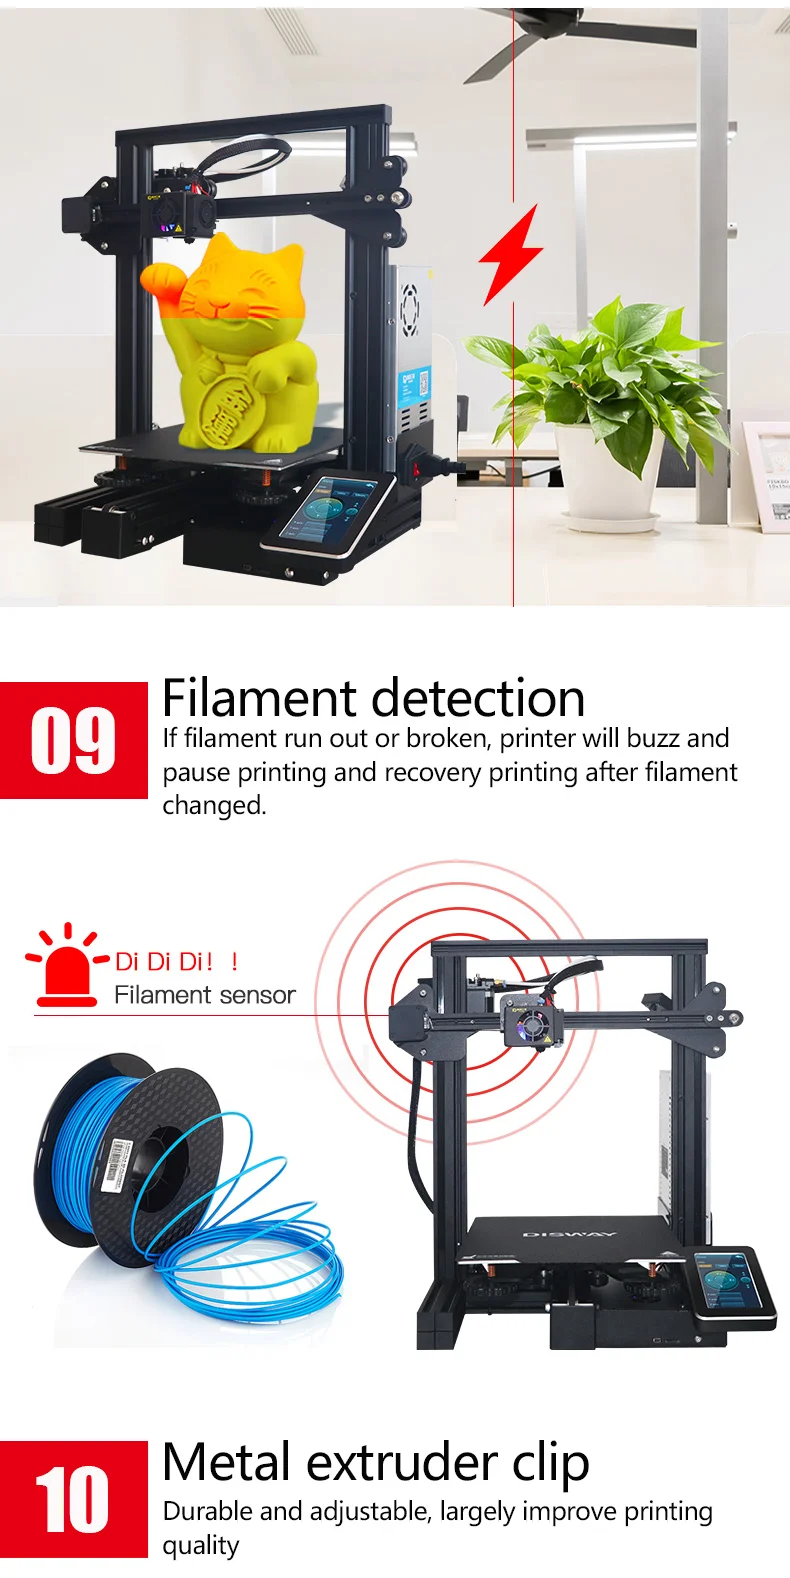 Disway cheap price auto leveling slient driver China manufacture directly 3d printer machine diy 3d printer kit for kids